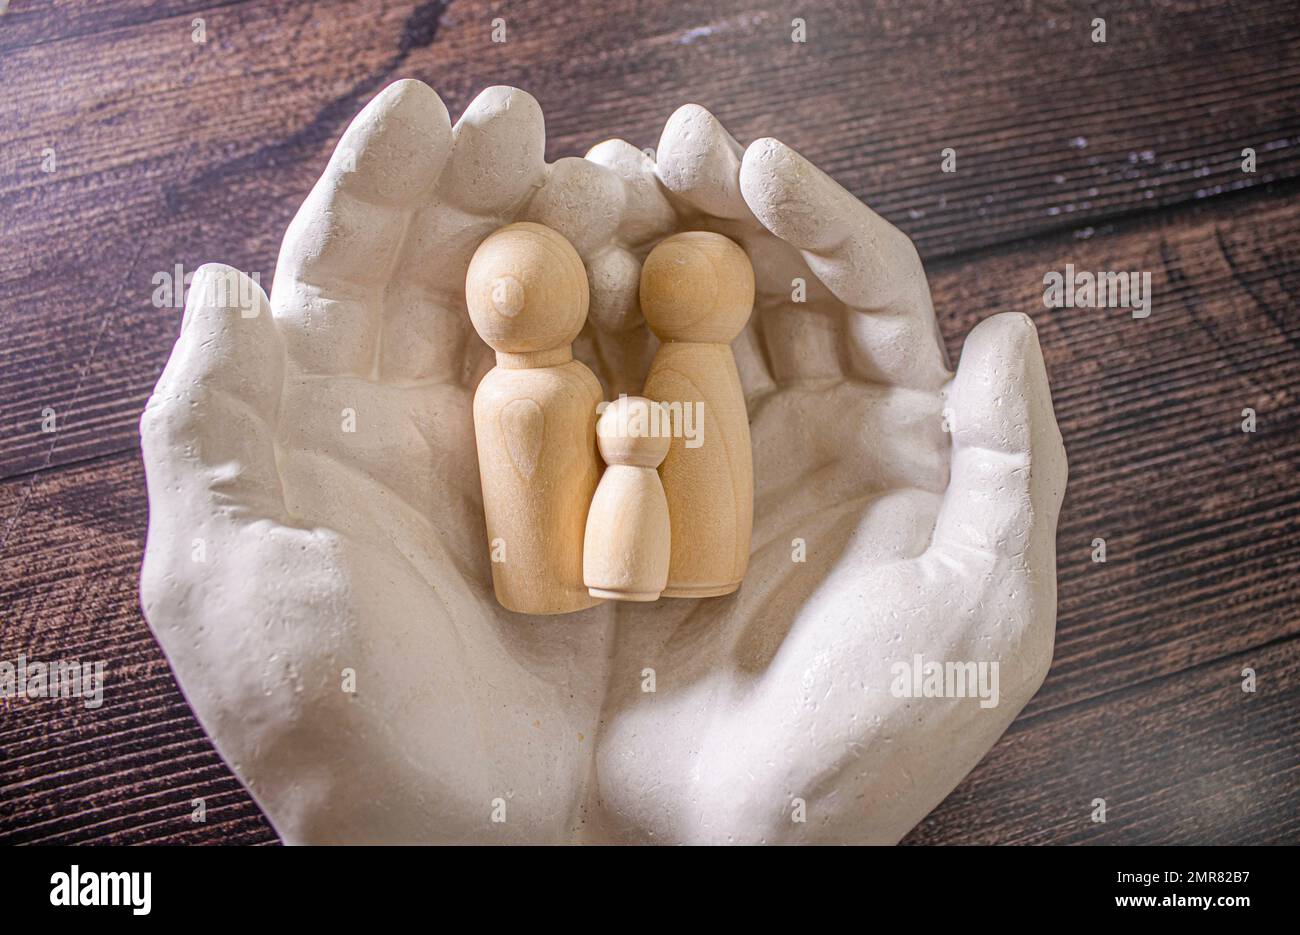 Close up of young women holding people shape male and female doll wooden peg dolls, family day, warmth, happiness, life insurance concept. Stock Photo